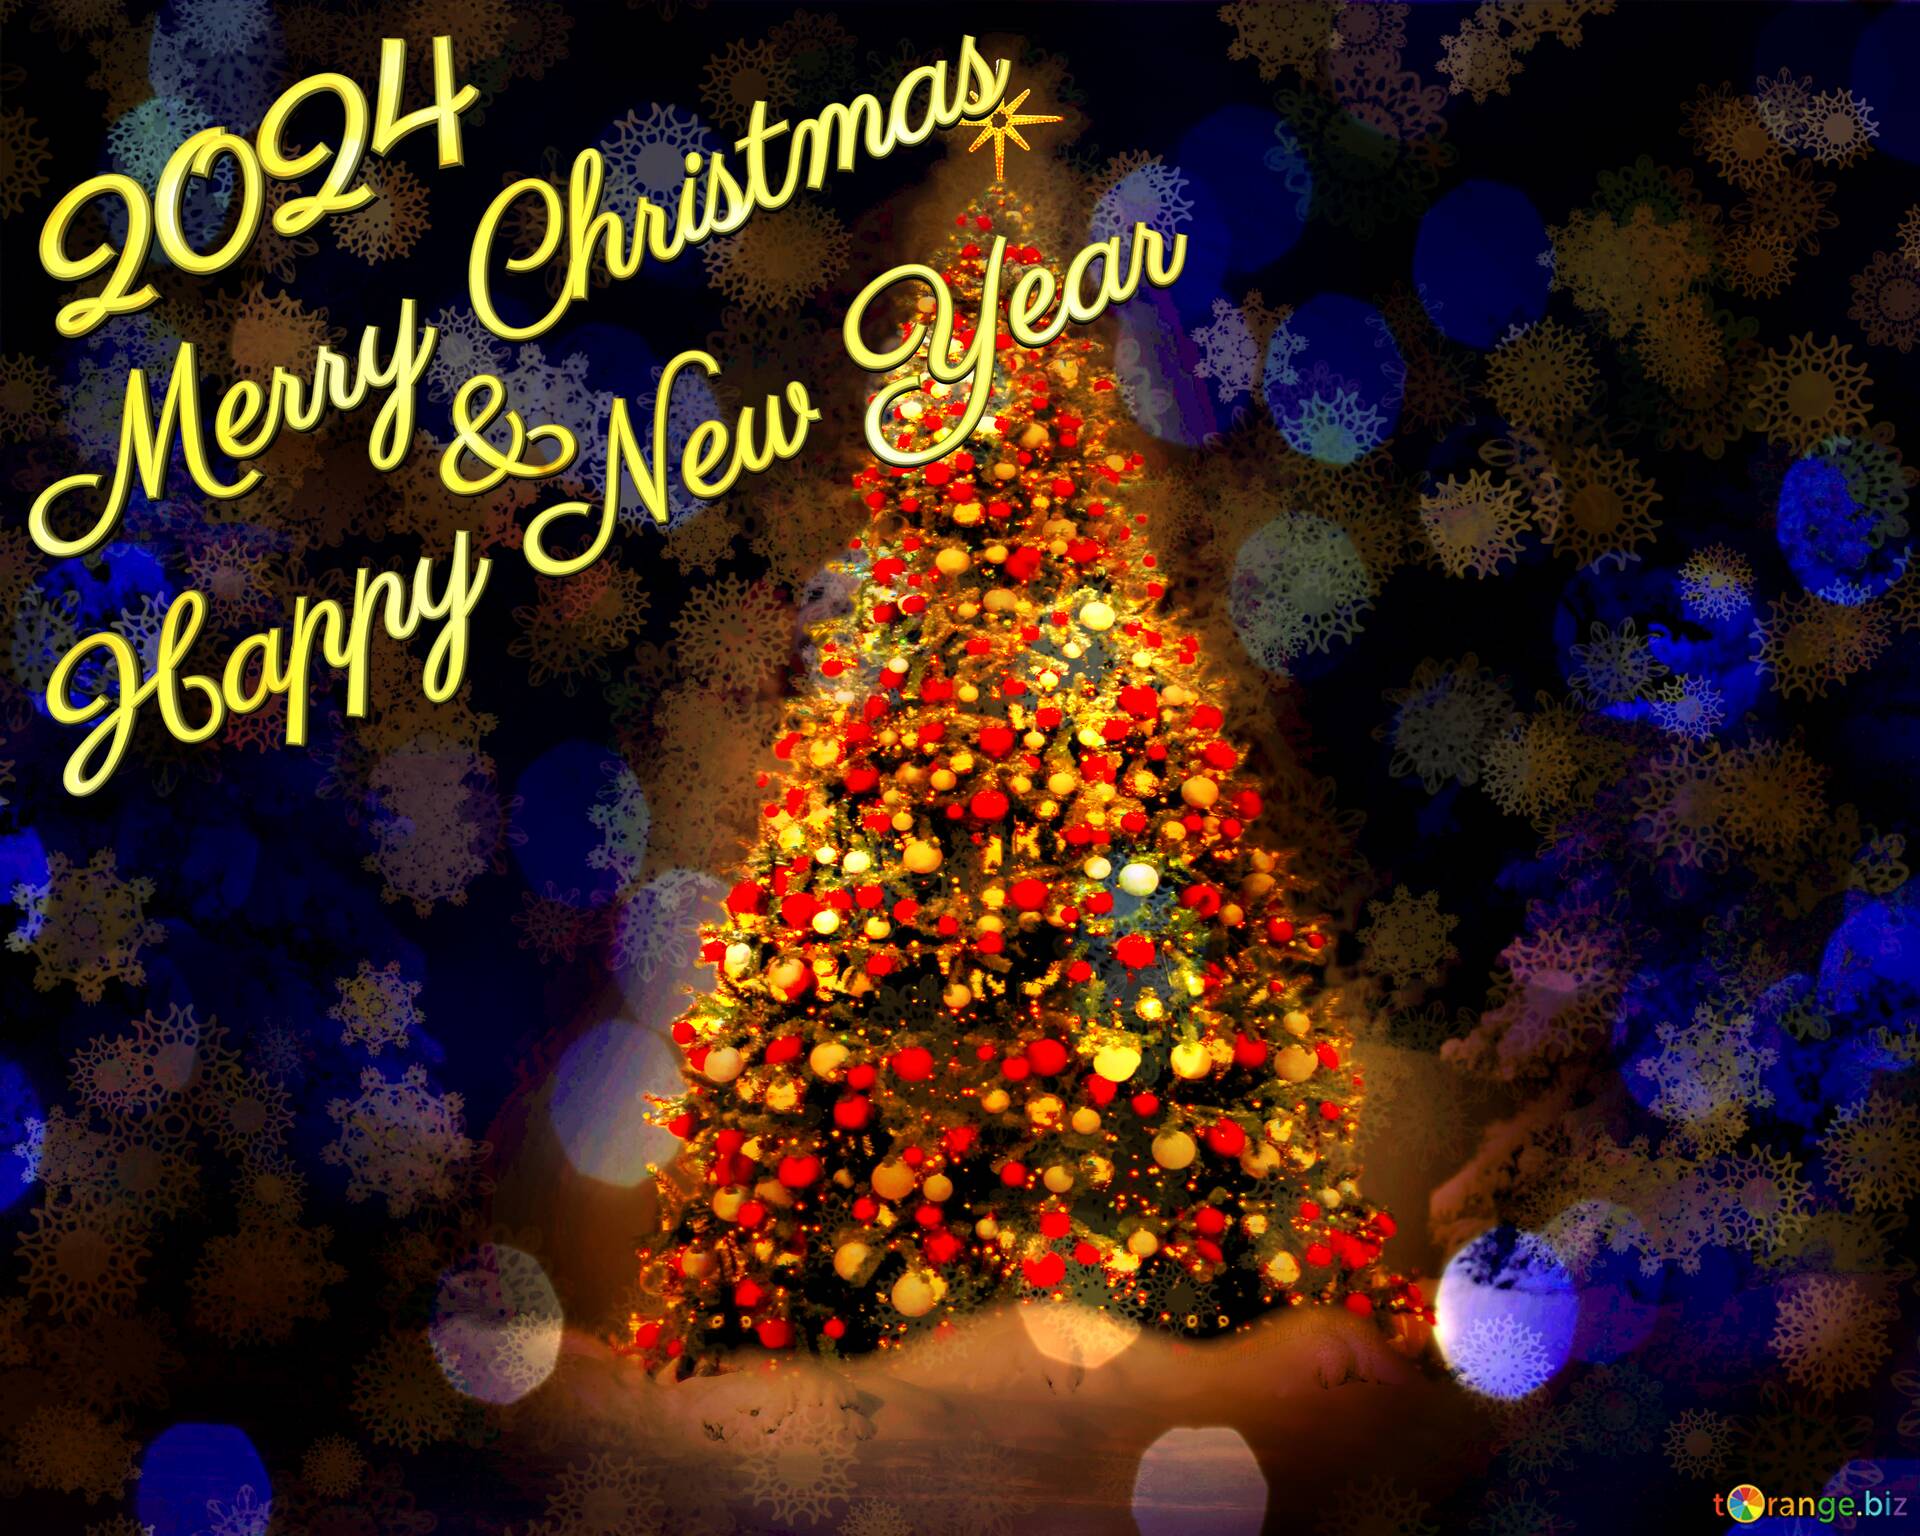 merry christmas wishes 2022 hd images Greetings torange